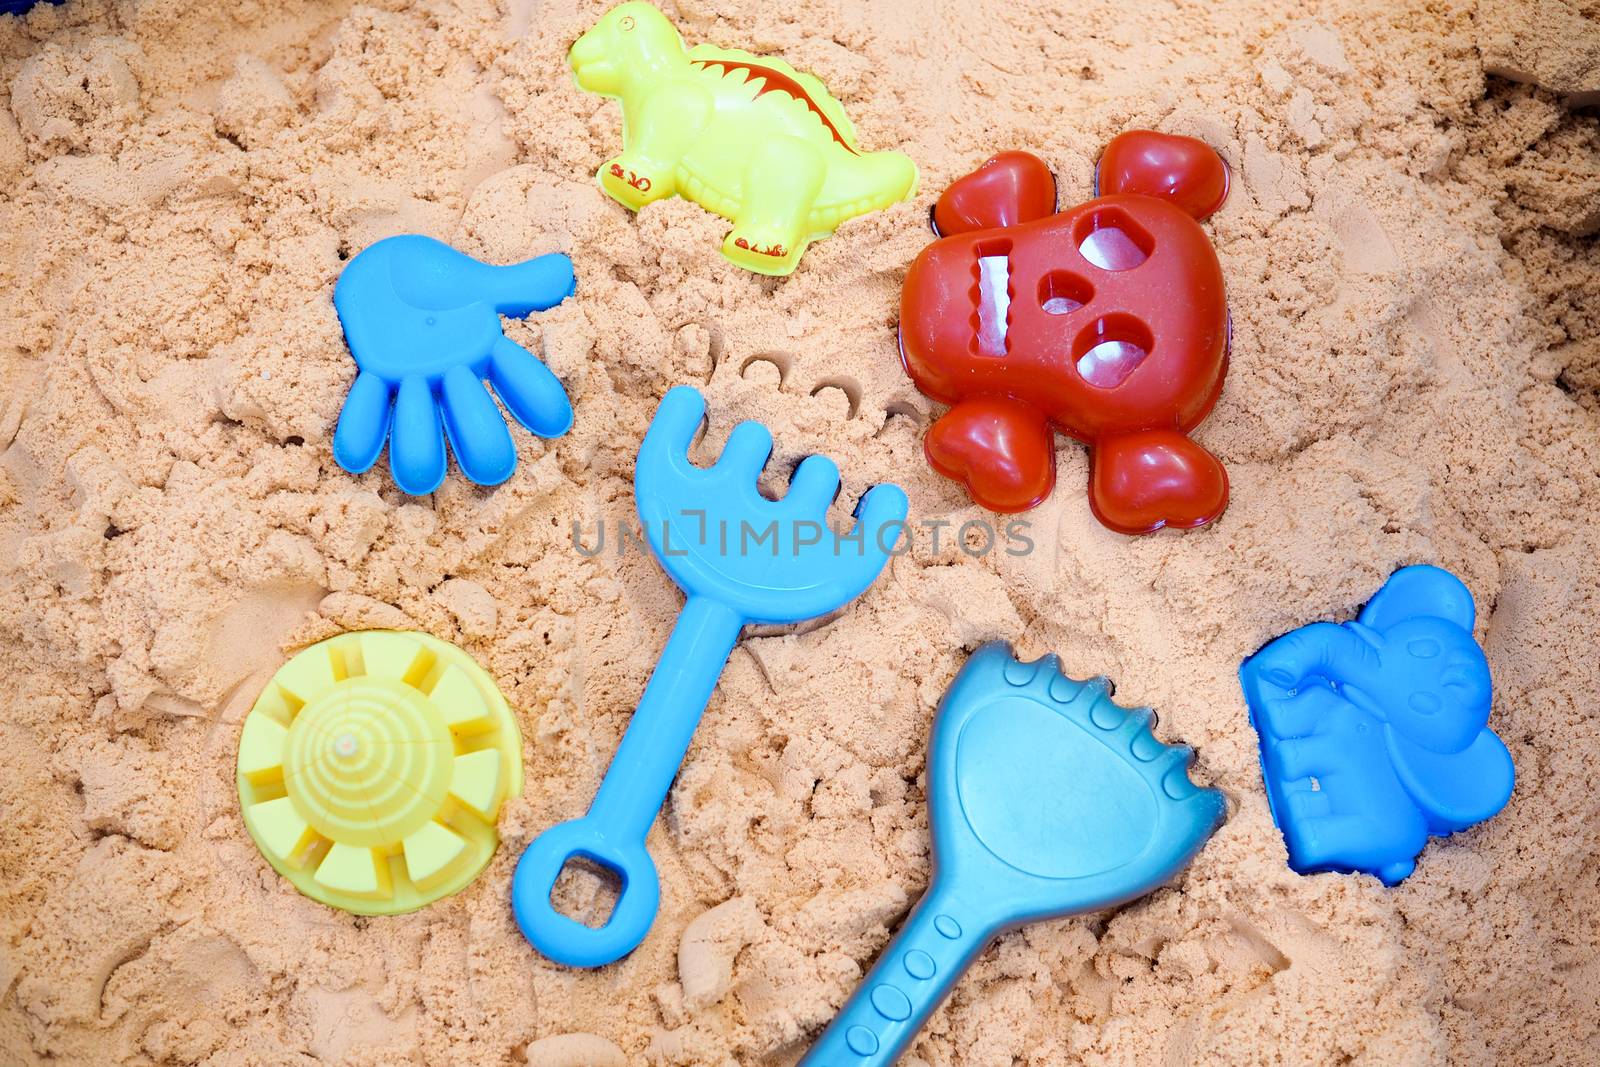 Baby toys, sand play equipment There are mold blocks, sculptures by kittima05